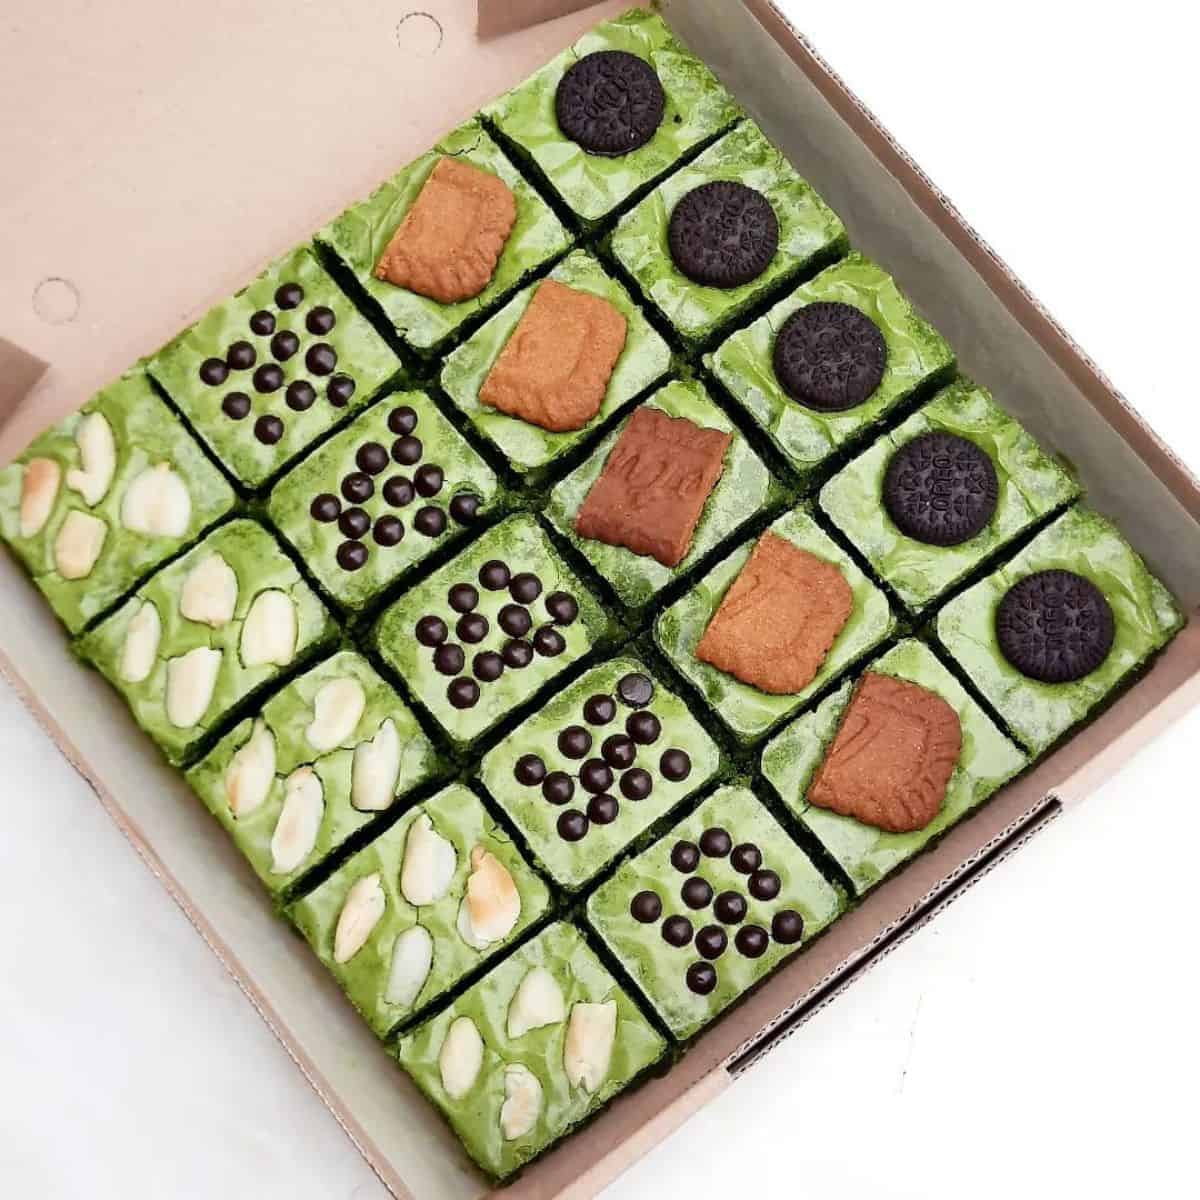 One layer of green cakes with mixed toppings of peanuts, chocolates, and biscuits